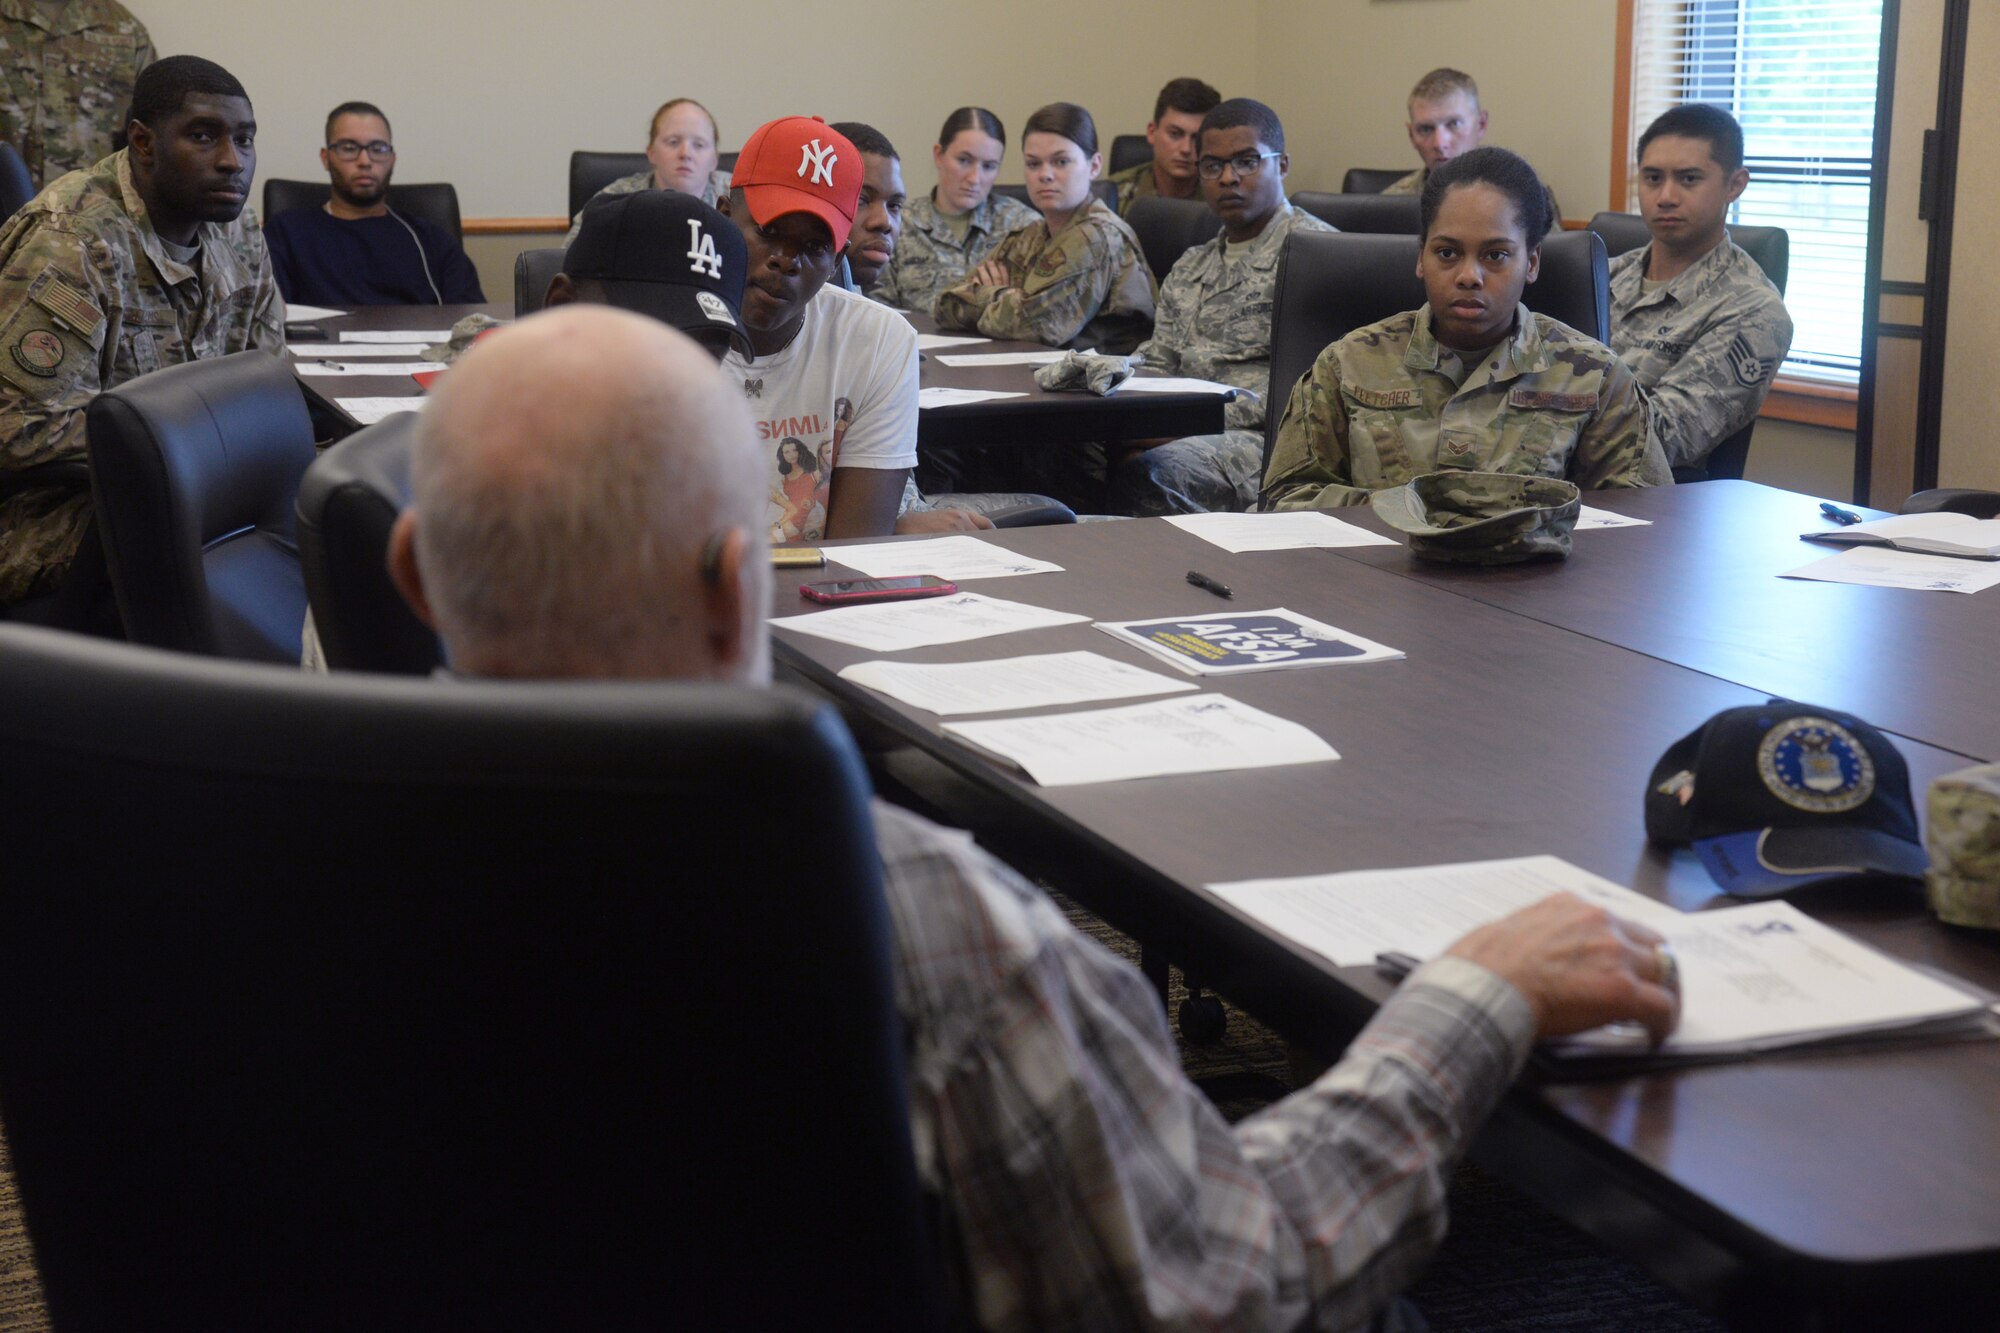 Jim Simmonds, Air Force Sergeants Association recruiter, shares a story during a meeting July 10, 2019, at Malmstrom Air Force Base, Mont.